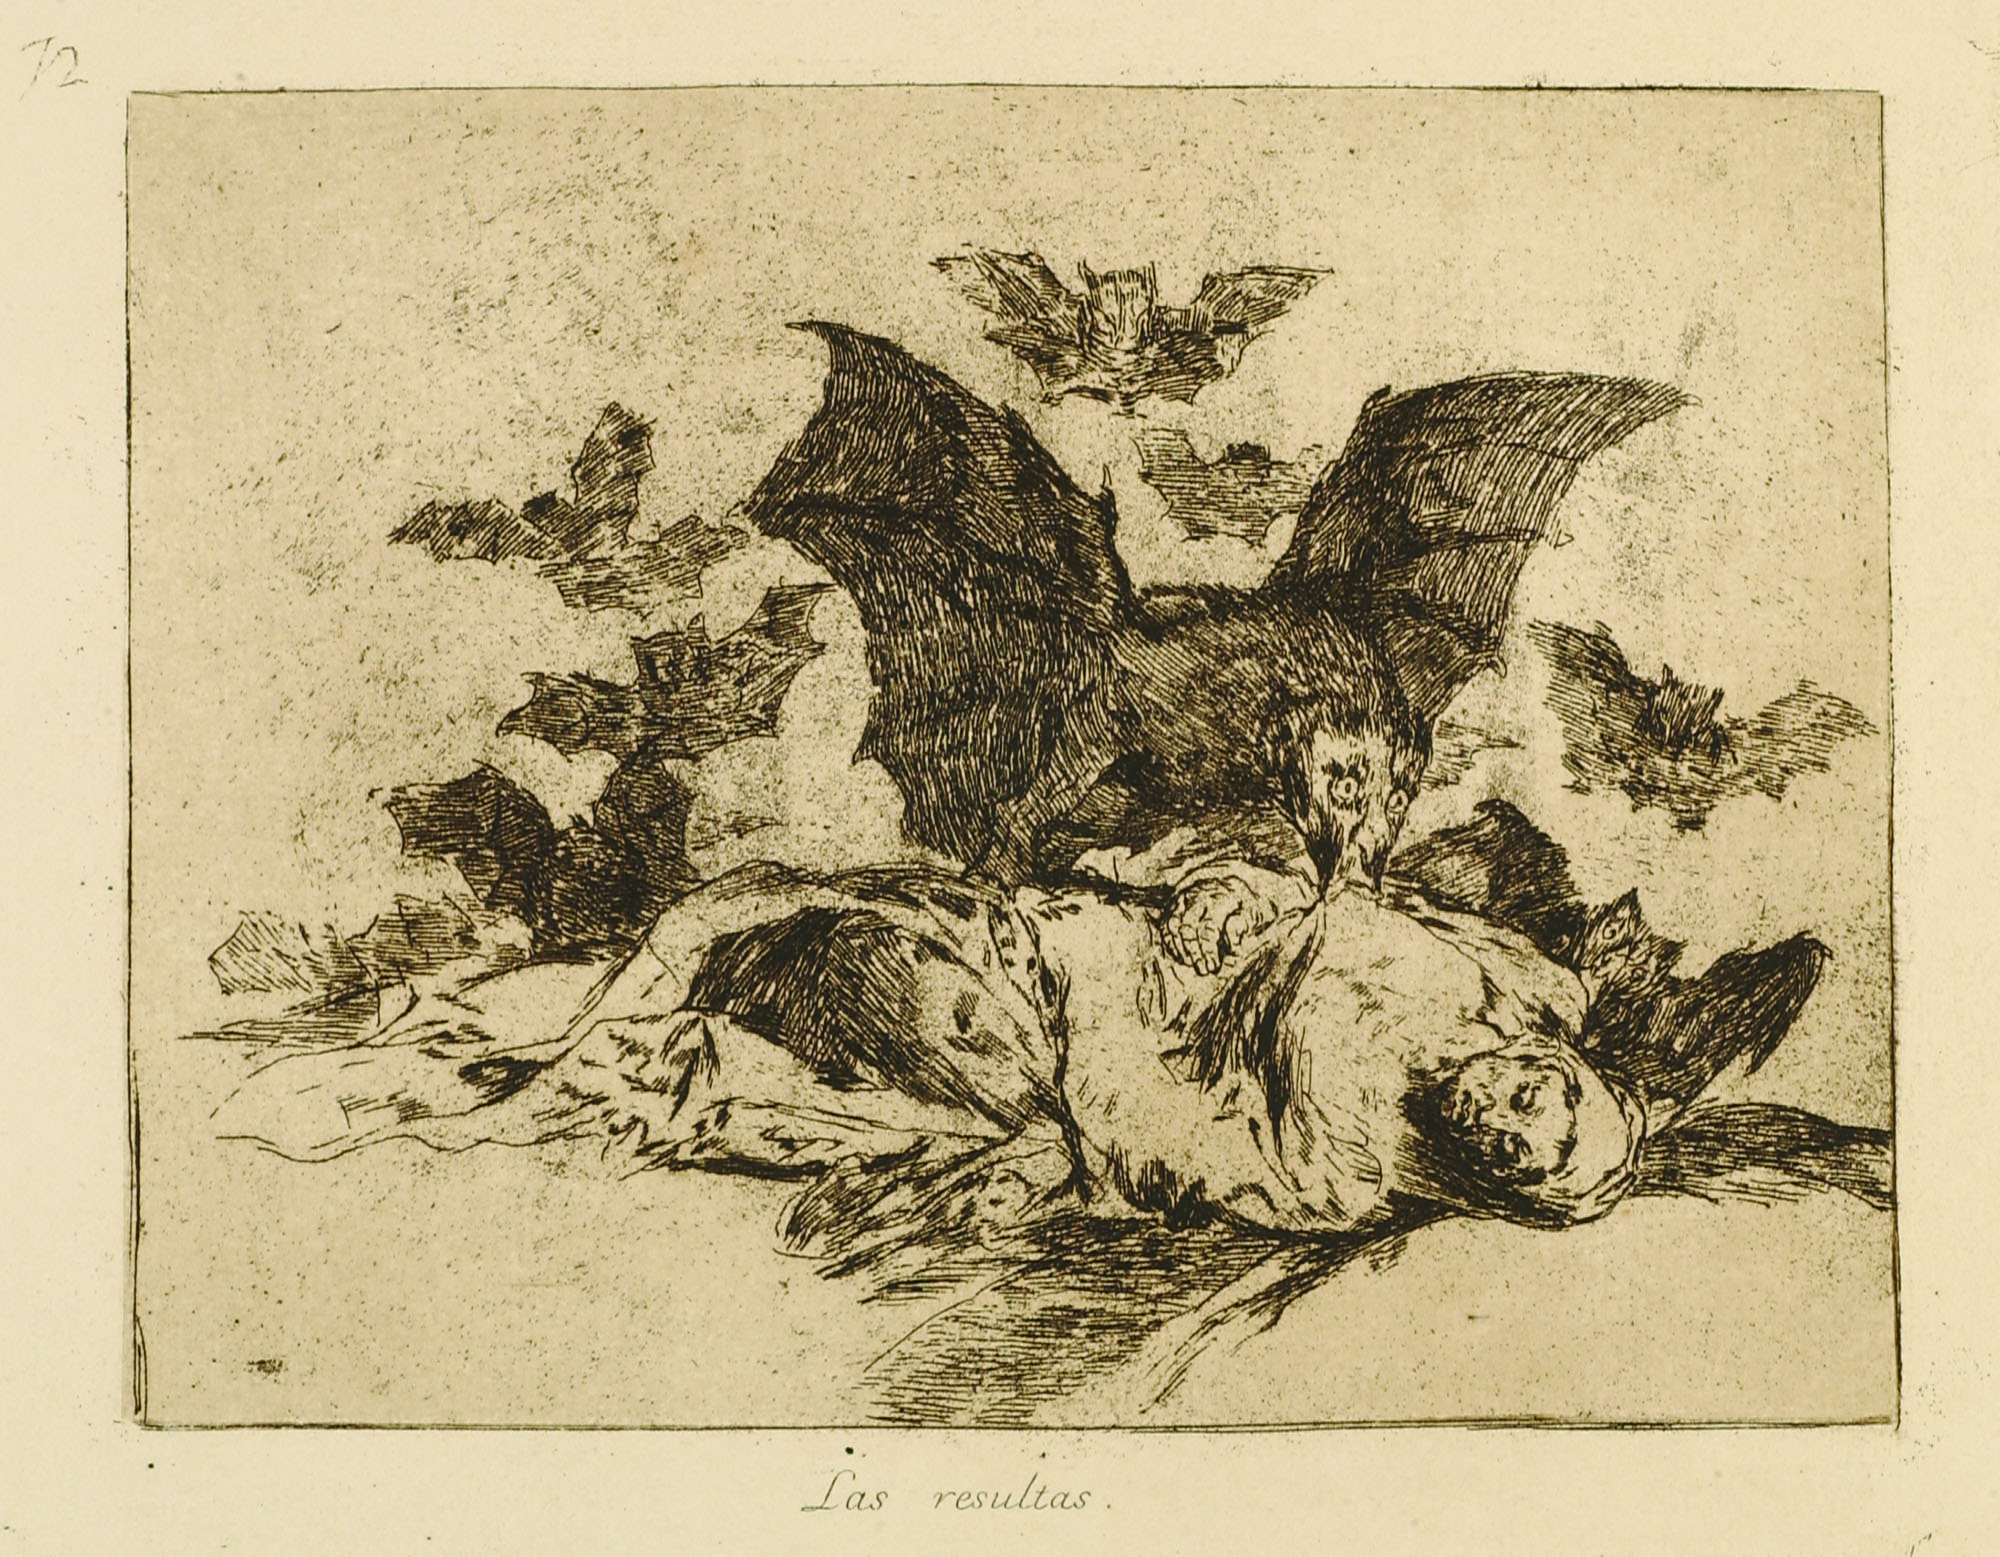 Francisco de Goya y Lucientes, Las resultas (The consequences), from the series “The Disasters of War,”  ca. 1820 (1863 1st ed.). Sixth edition printed in the Calcografía nacional for the Royal Academy of San Fernando in 1930. Etching on laid Arches paper. Courtesy of the Grinnell College Art Collection, Gift of Helena Percas de Ponseti and Ignacio V. Ponseti.